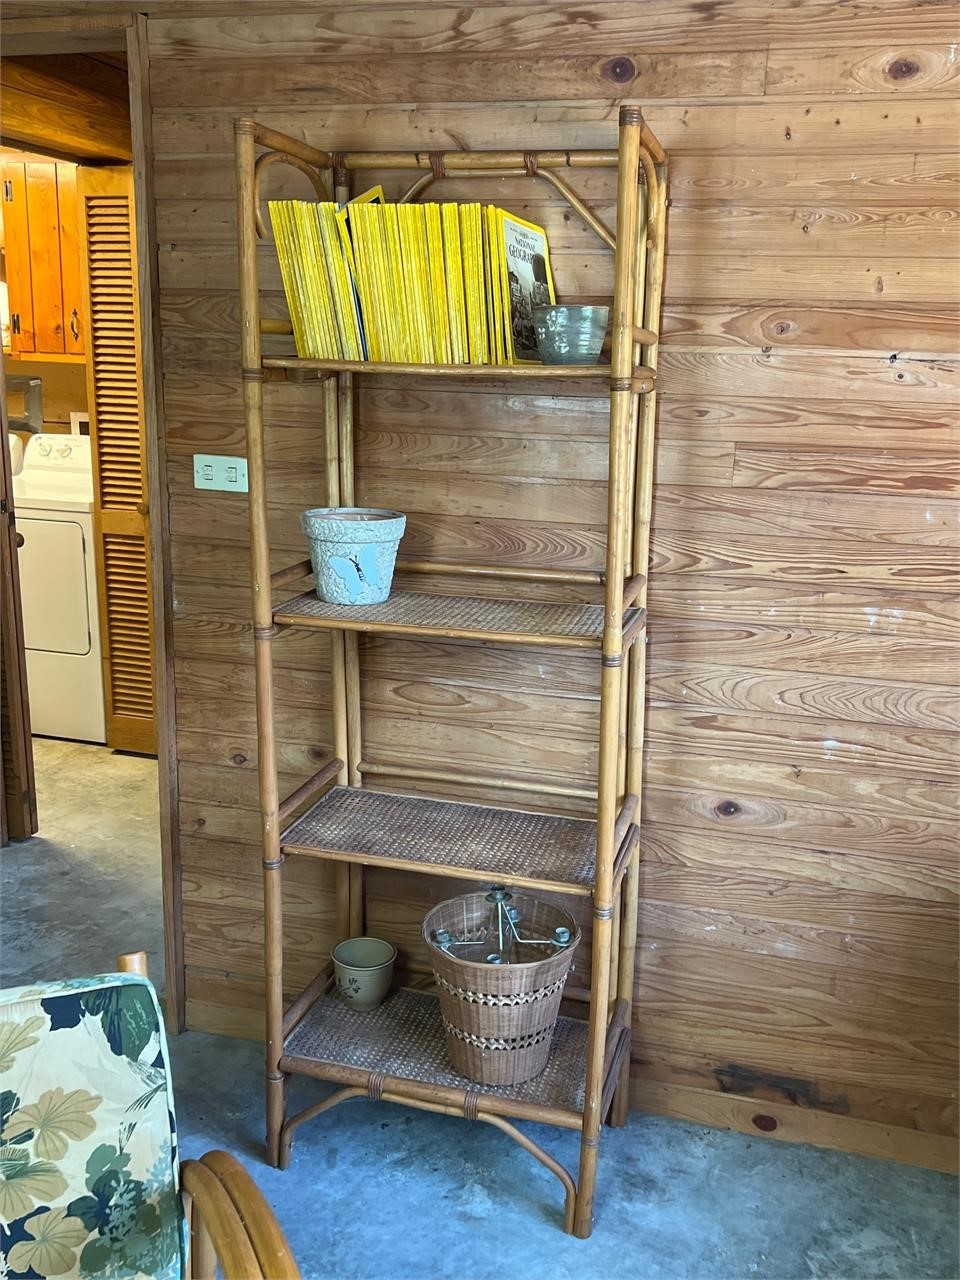 Rattan shelf and contents has lean